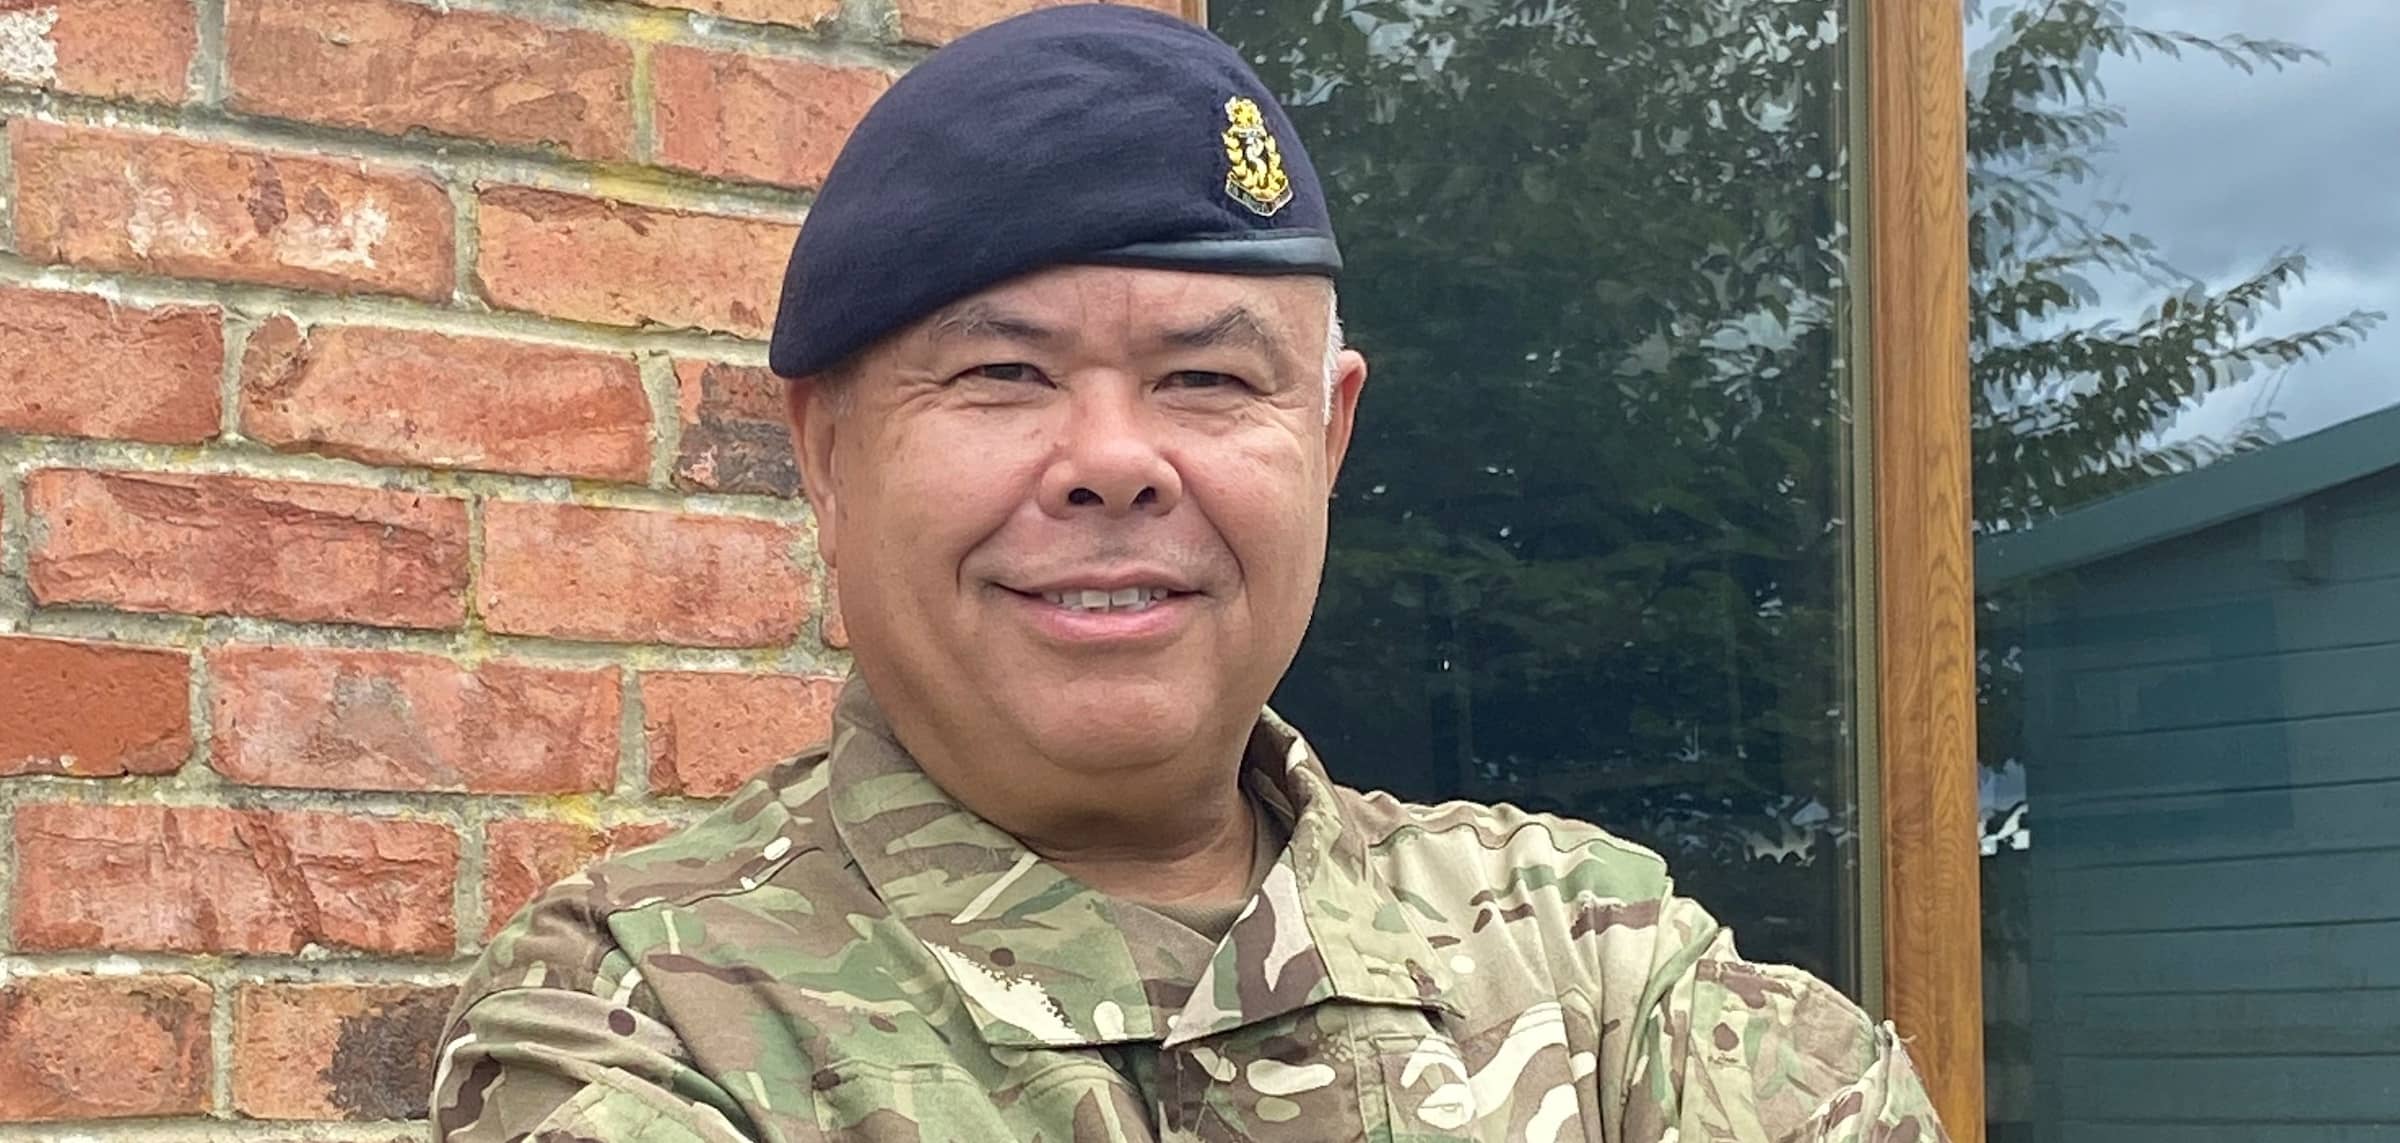 Sir jonathan van-tam mbe announced as honorary colonel for medial support for the army cadet force (acf)